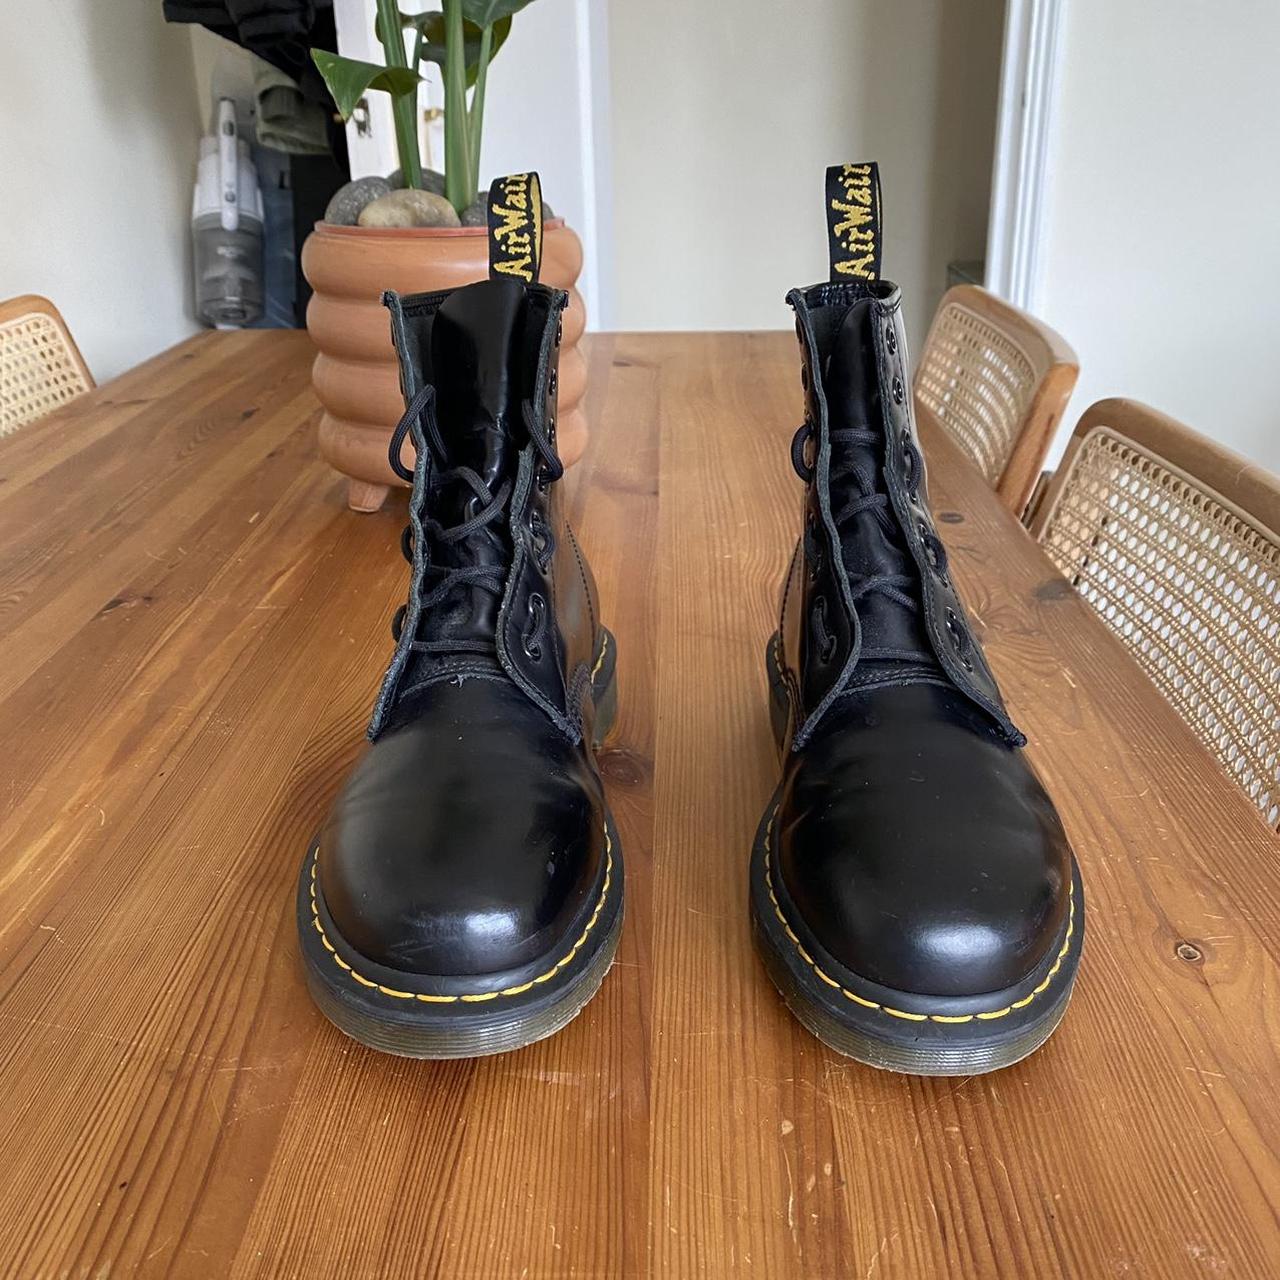 Black with yellow stitching Dr Martens, 8 eyelets,... - Depop